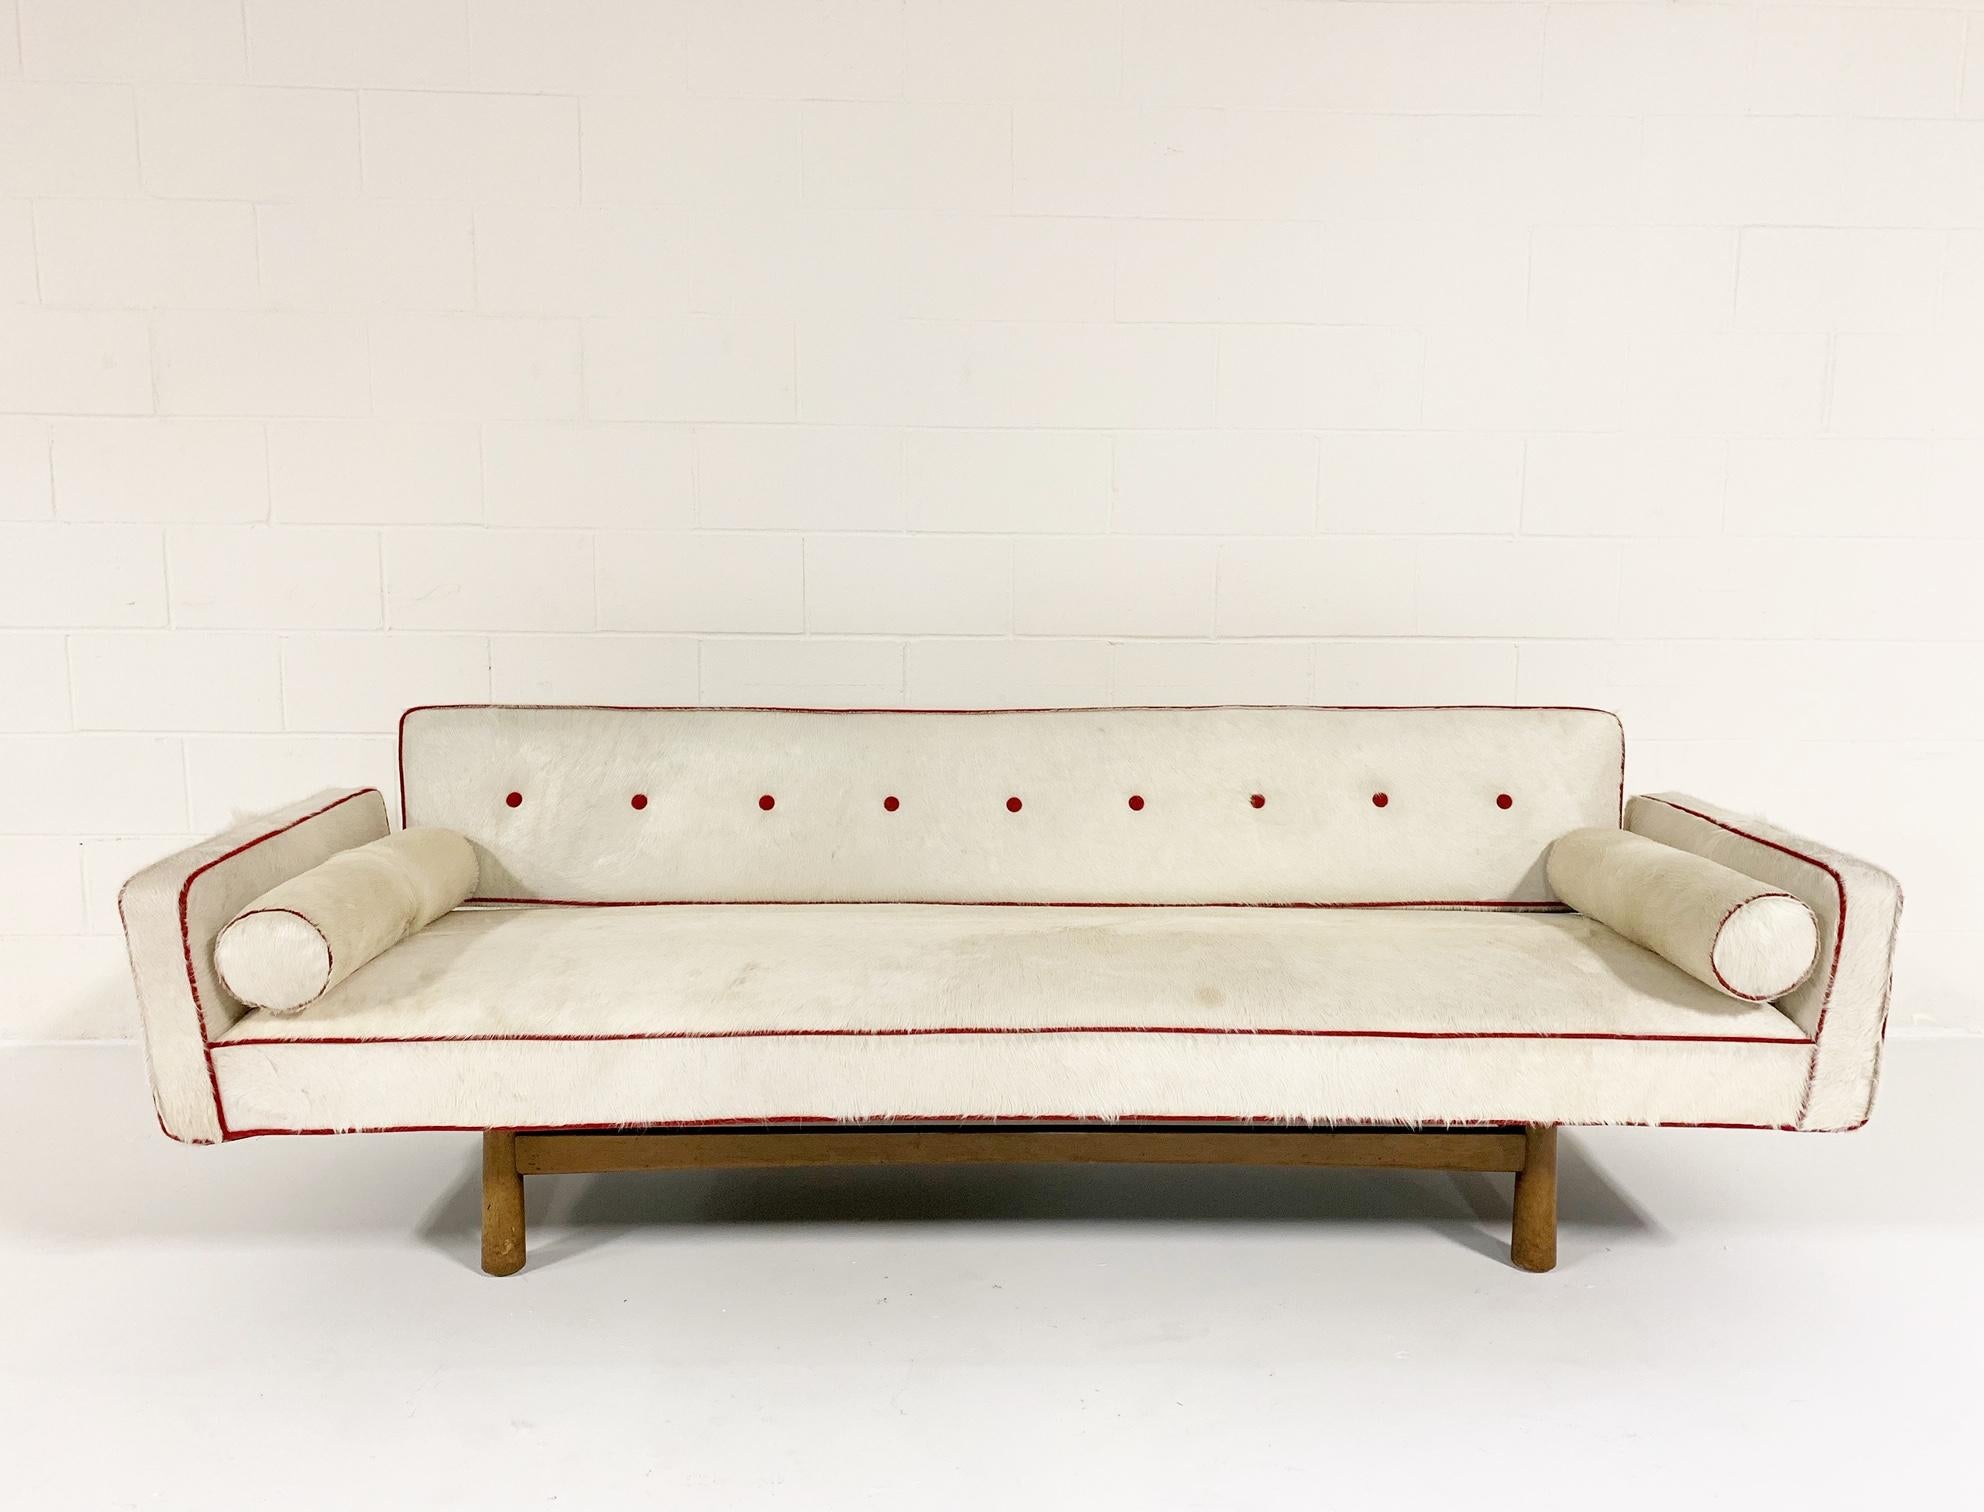 Vintage Edward Wormley for Dunbar Model 5316 Sofa Restored in Brazilian Cowhide with Loro Piana Red Cashmere Welting

A Calvin Klein western shirt inspired the look of this one-of-a-kind, vintage 1953 Edward Wormley Sofa. The sofa was masterfully